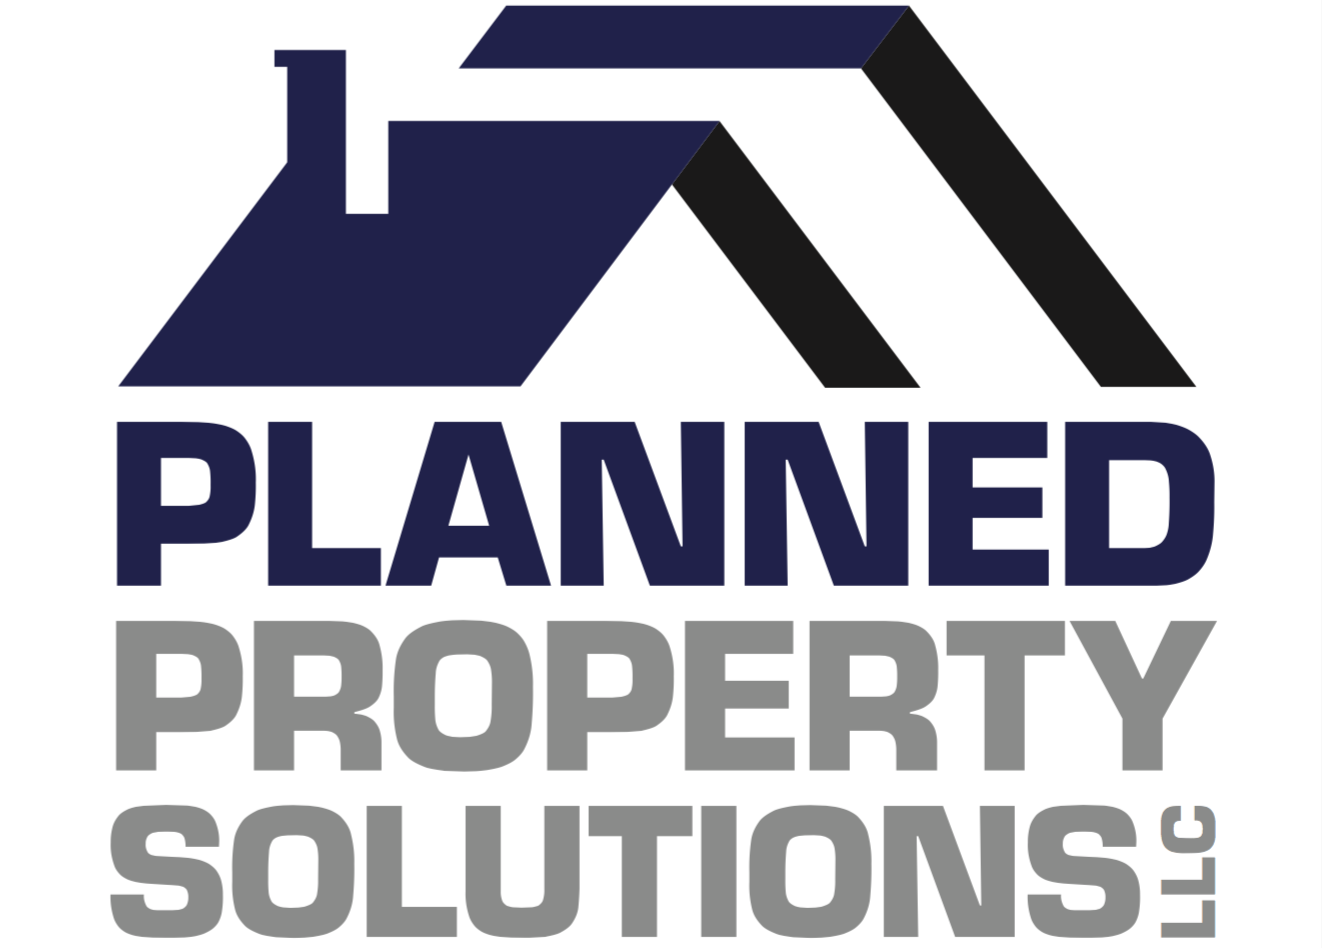 Planned Property Solutions LLC